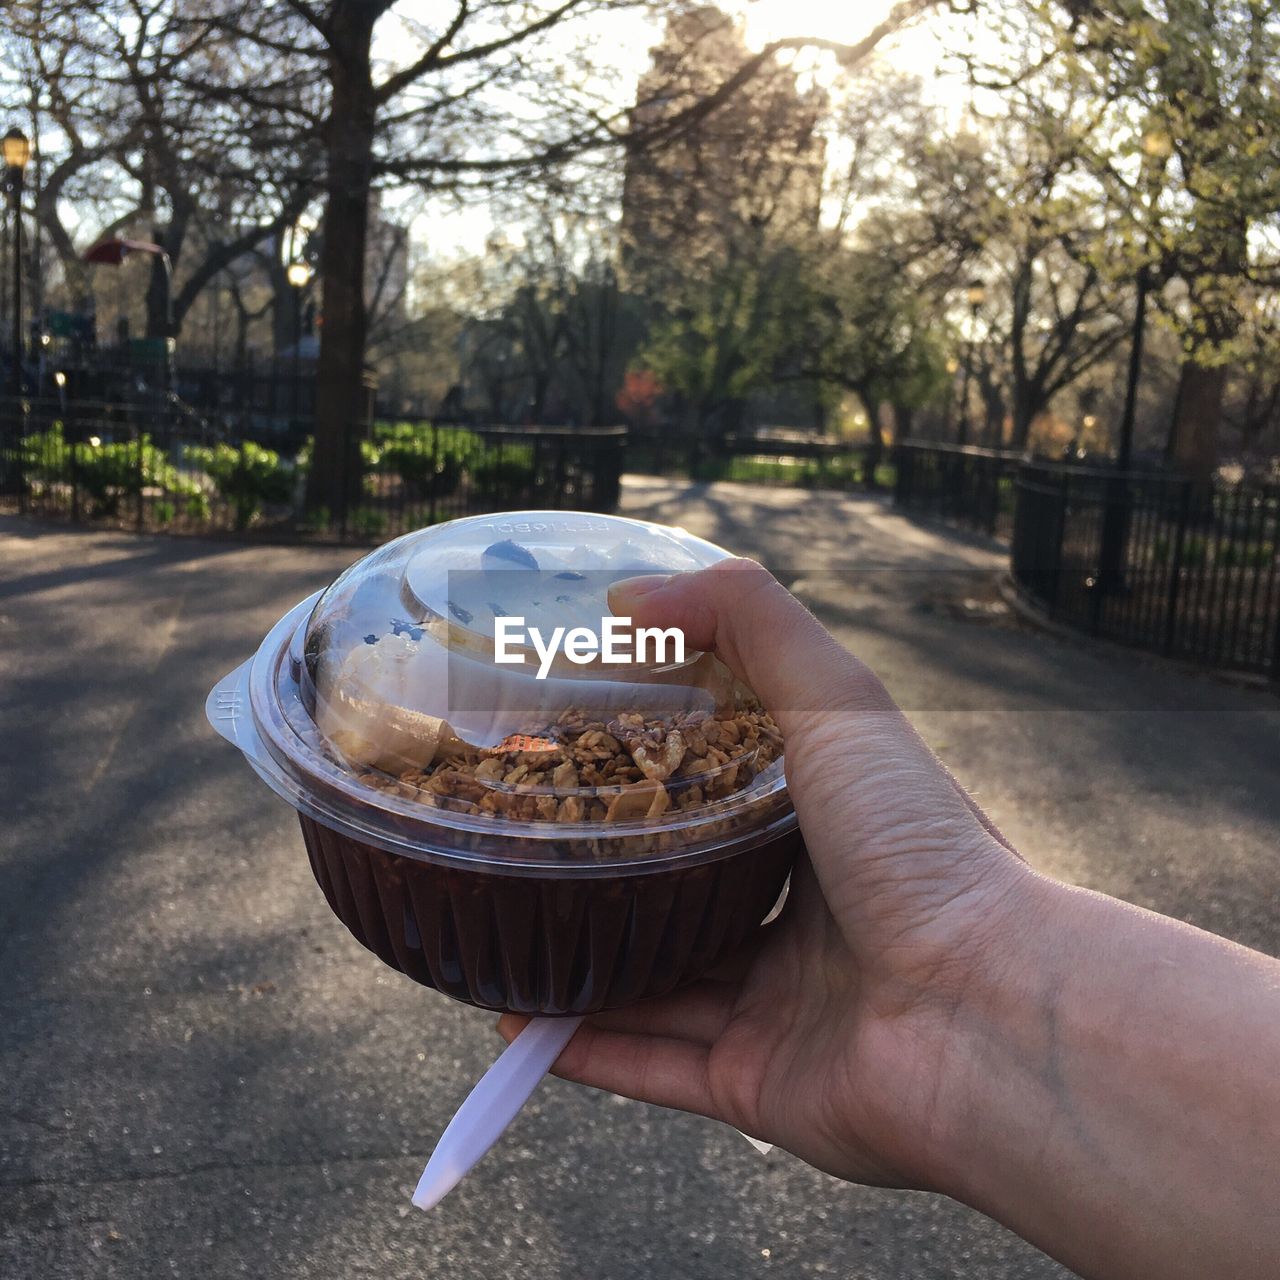 Cropped hand holding food in plastic container on street